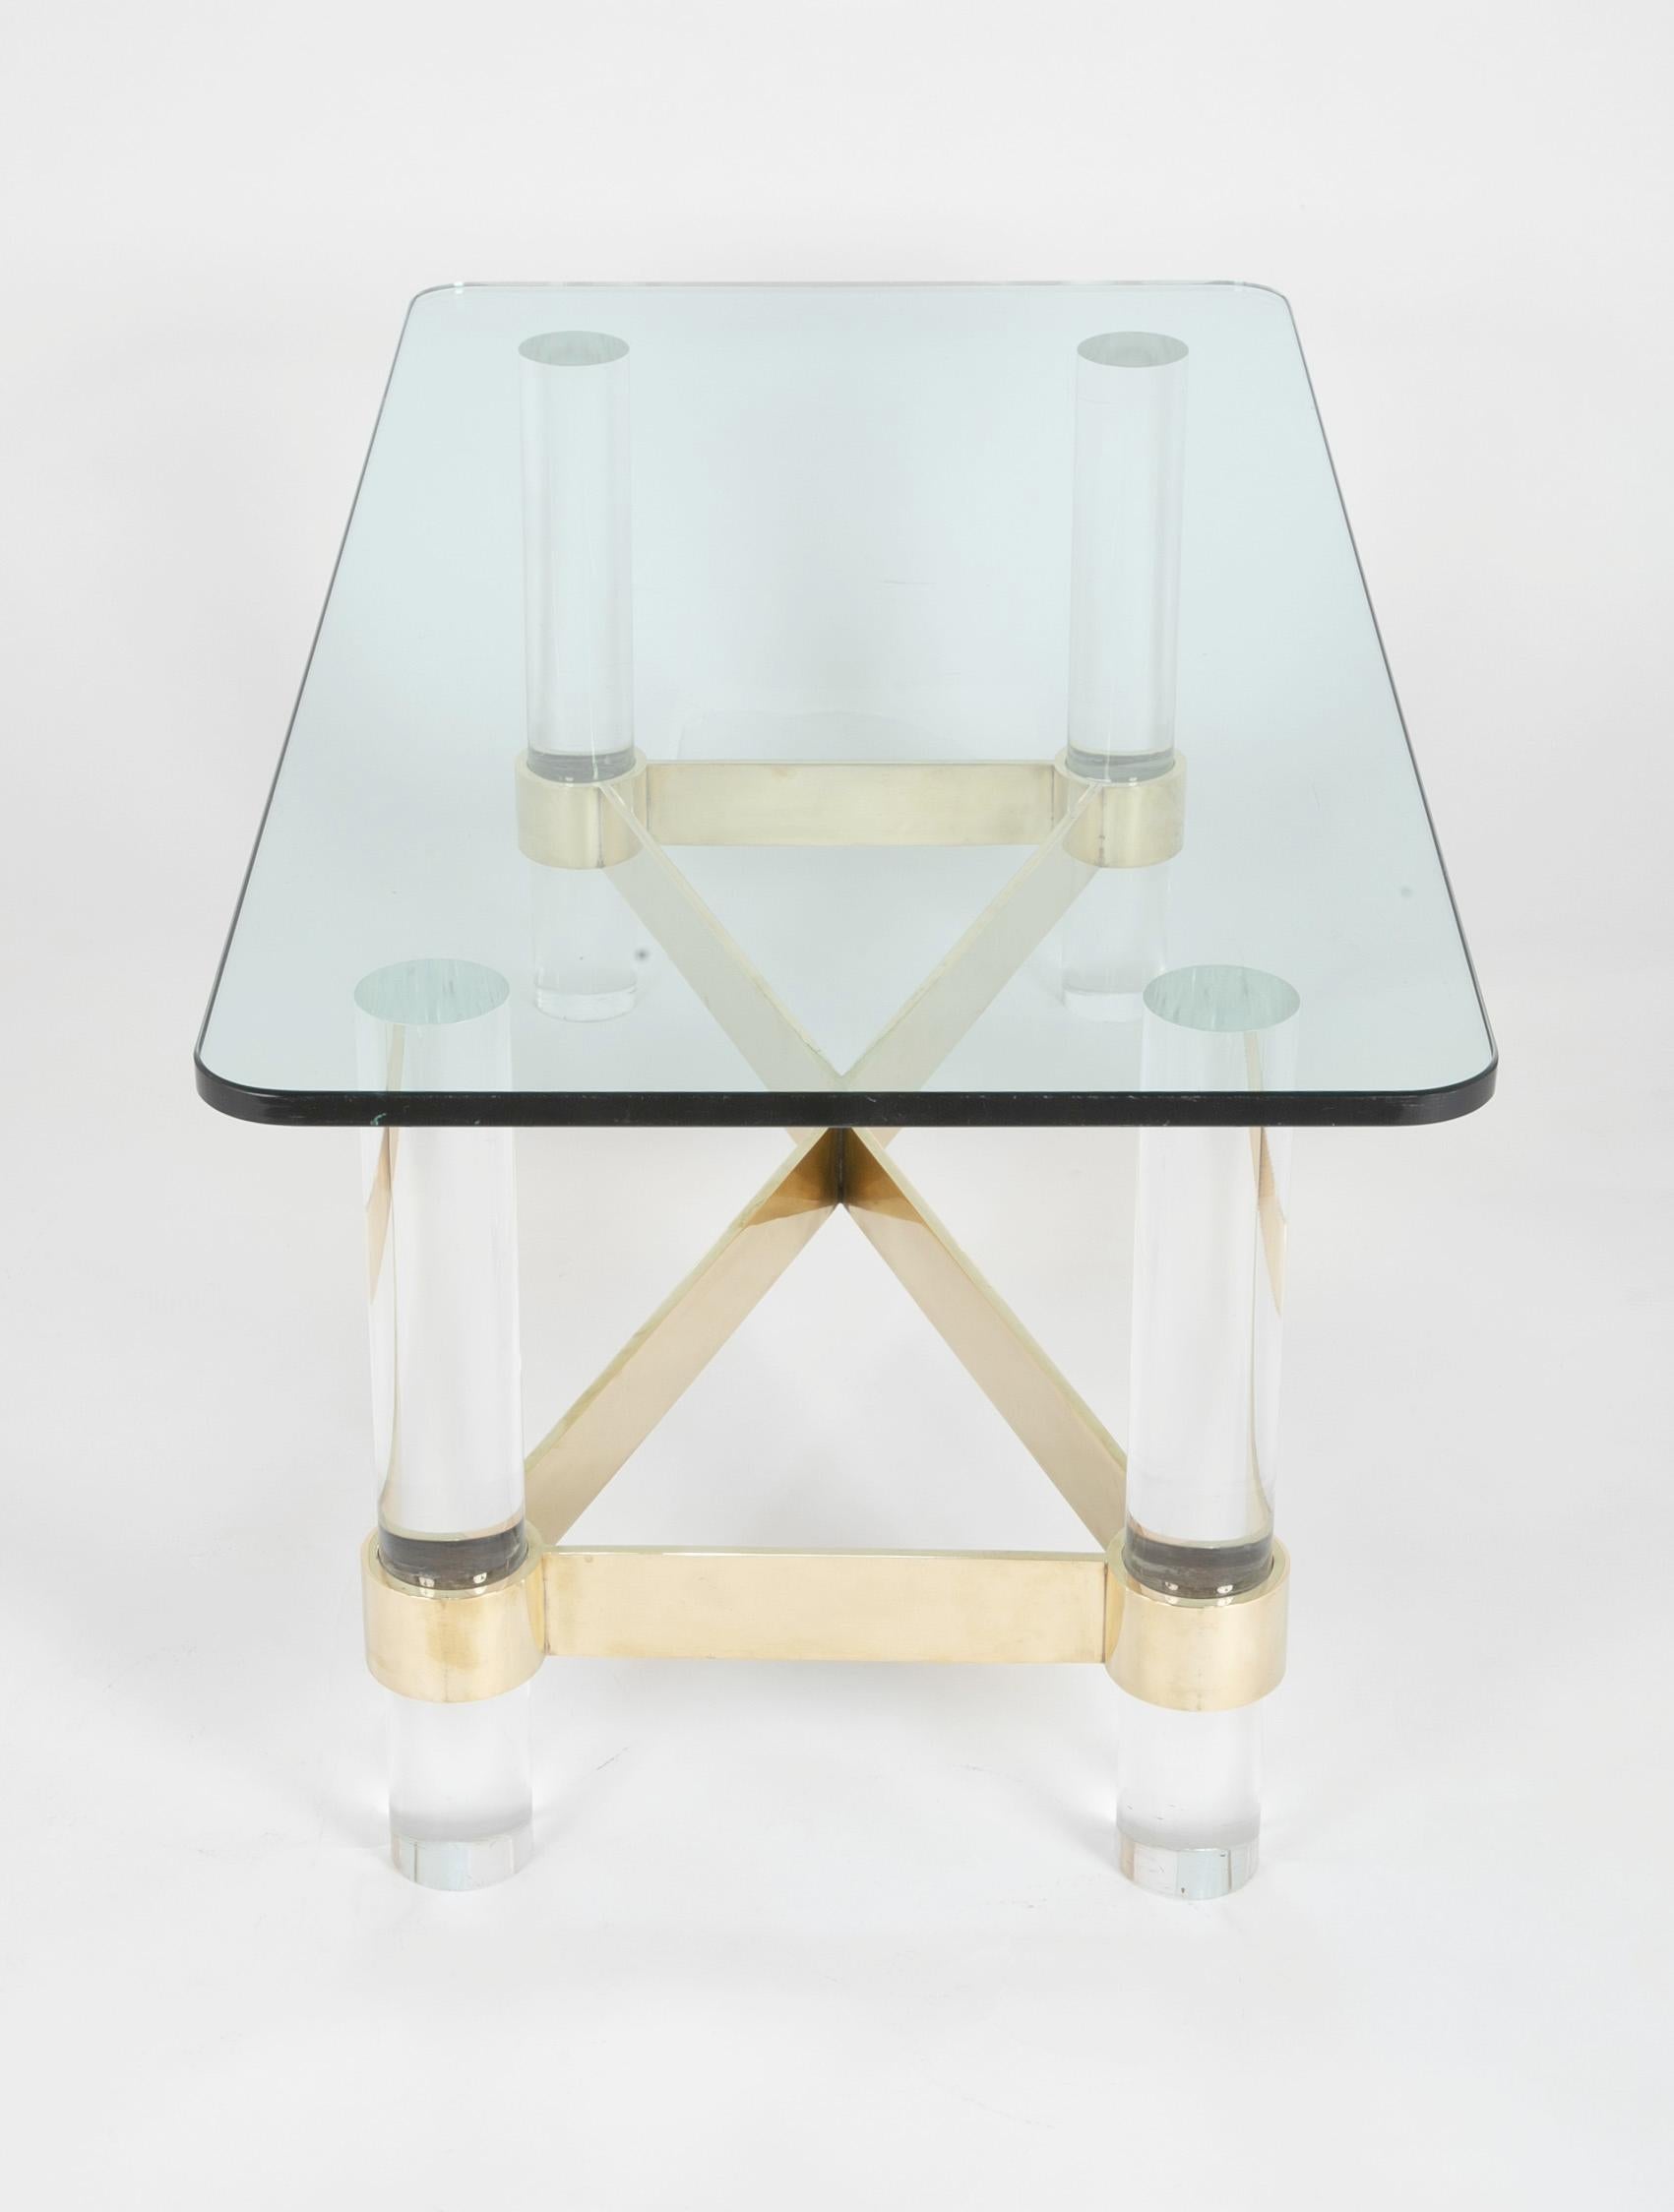 Late 20th Century Lucite and Brass Glass Top Coffee Table in the Manner of Karl Springer